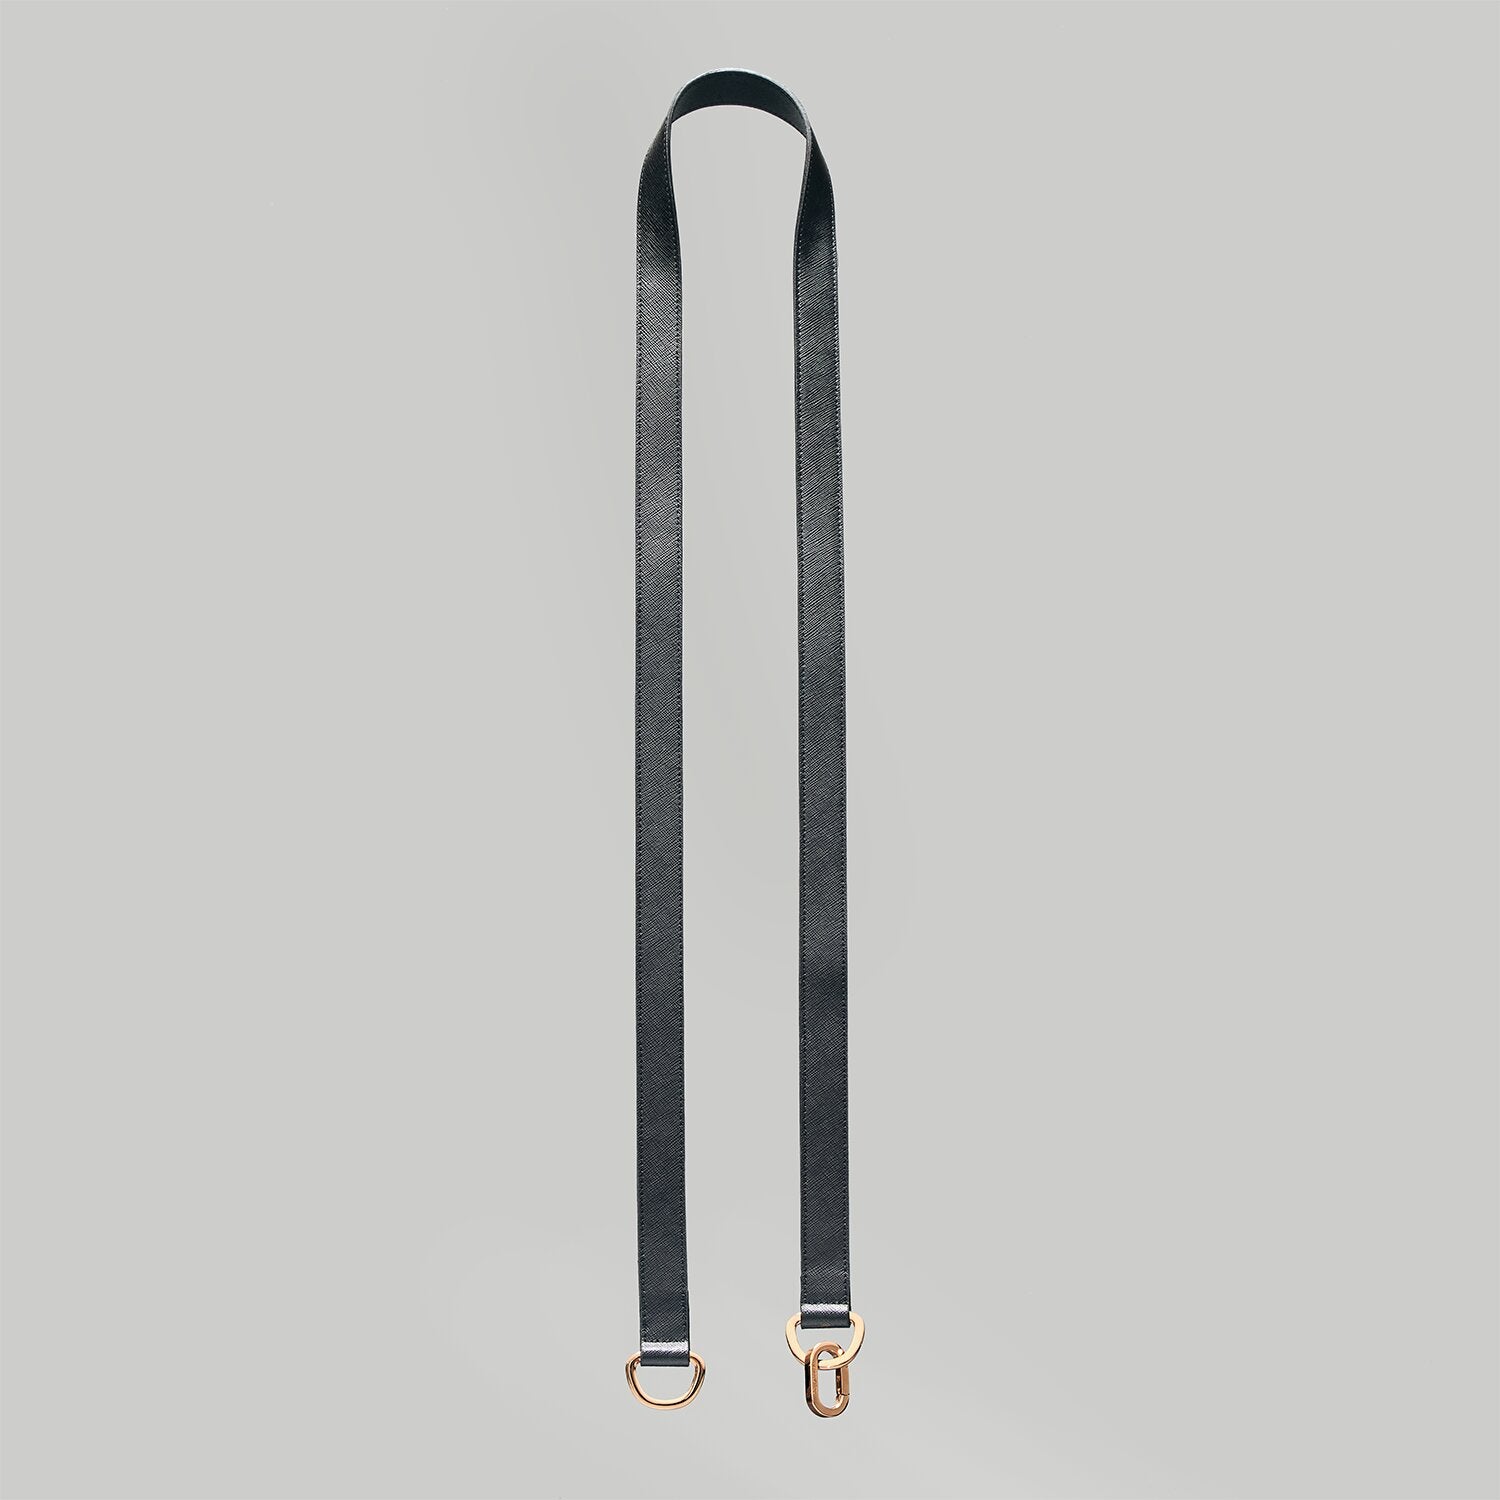 Dog leash in black Saffiano leather with Gold